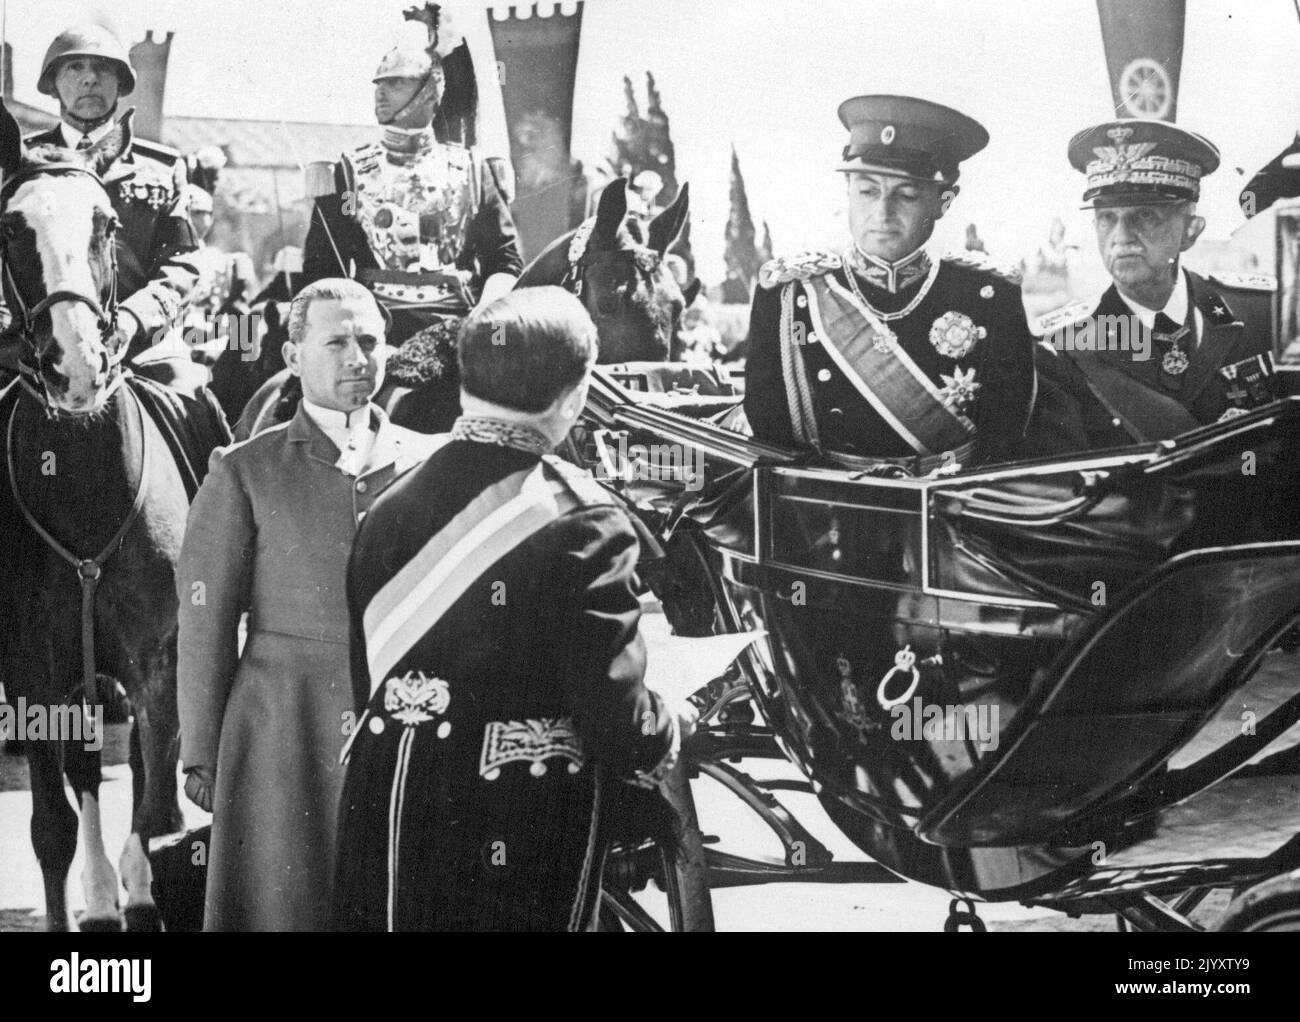 Prince Paul's long talks with Mussolini. Prince Paul, Prince regent of Yugoslavia, had two long talks with Mussolini, yesterday. He arrived in Rome yesterday with Princess Olga on a three day visit to the King and Queen of Italy. Prince Paul and King of Italy seen in Rome on Prince Paul's arrival. May 11, 1939. (Photo by Sport and General Press Agency Limited) Stock Photo